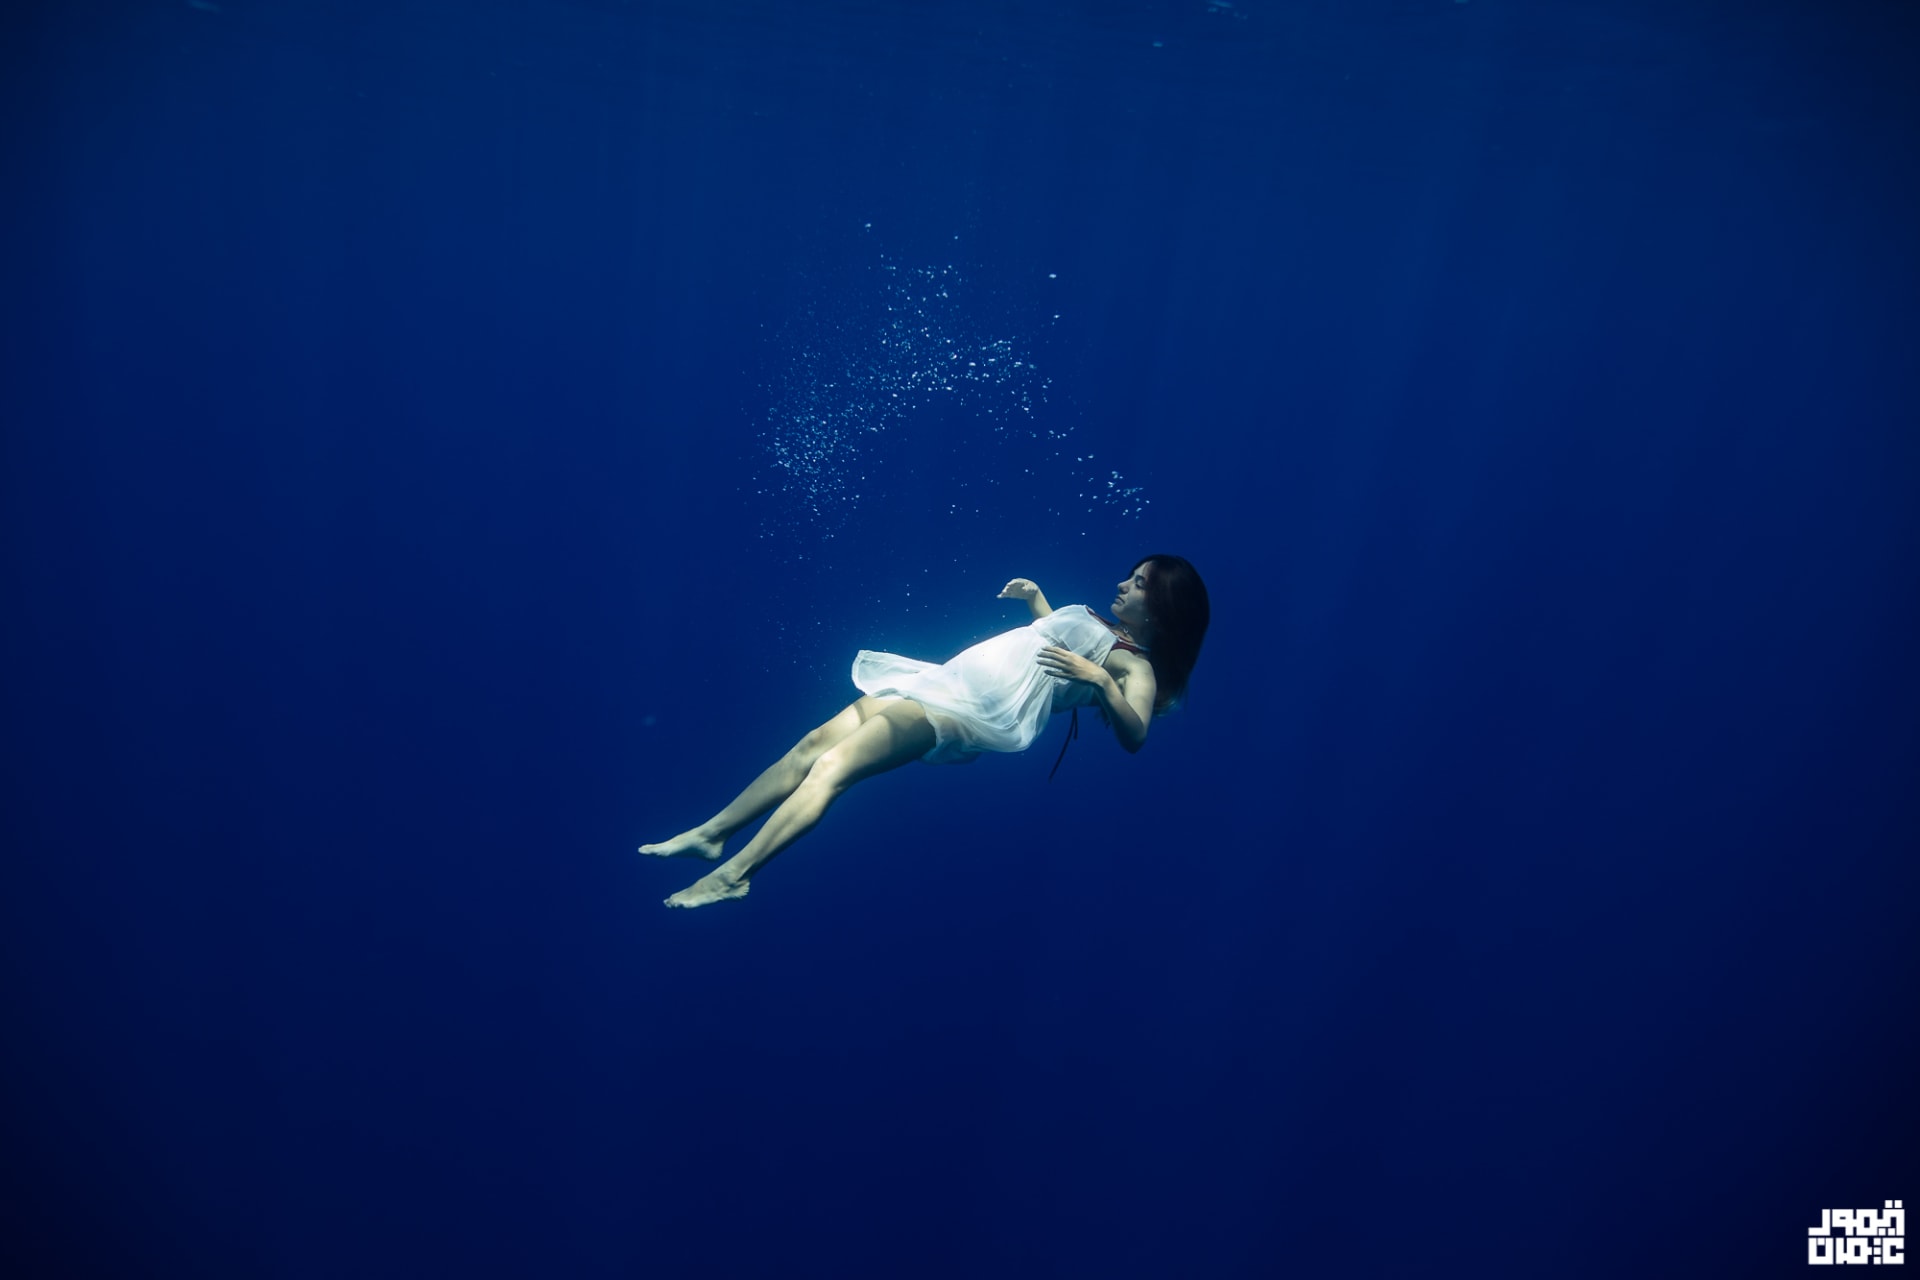 Underwater dancing in Egypt .. an experience "charming" Promotes women's freedom of speech